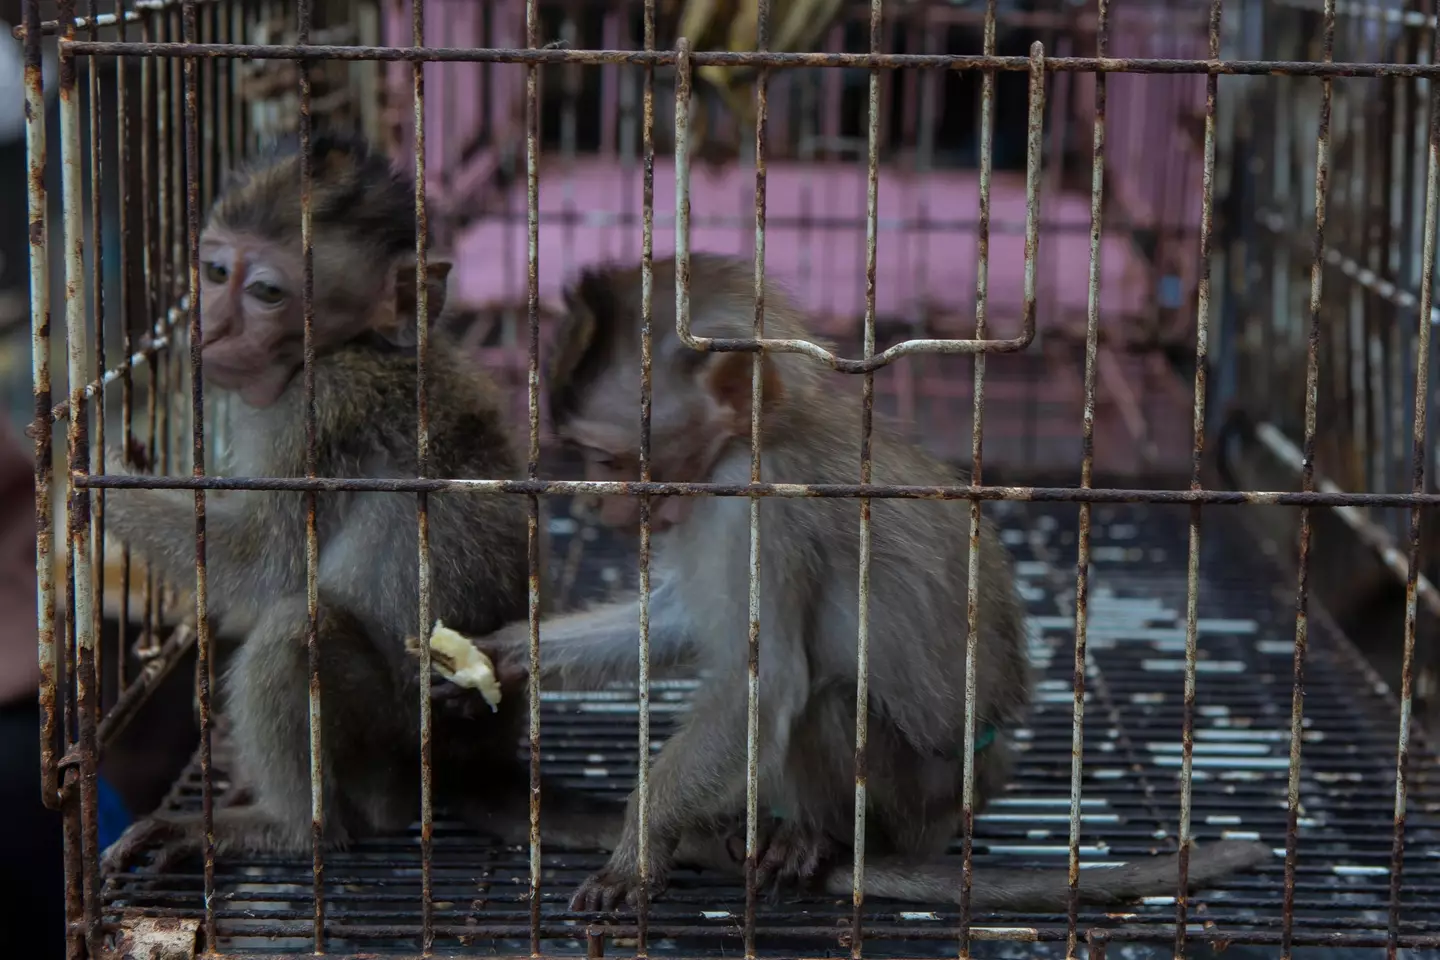 Baby long-tailed macaques in a cage in Indonesia.